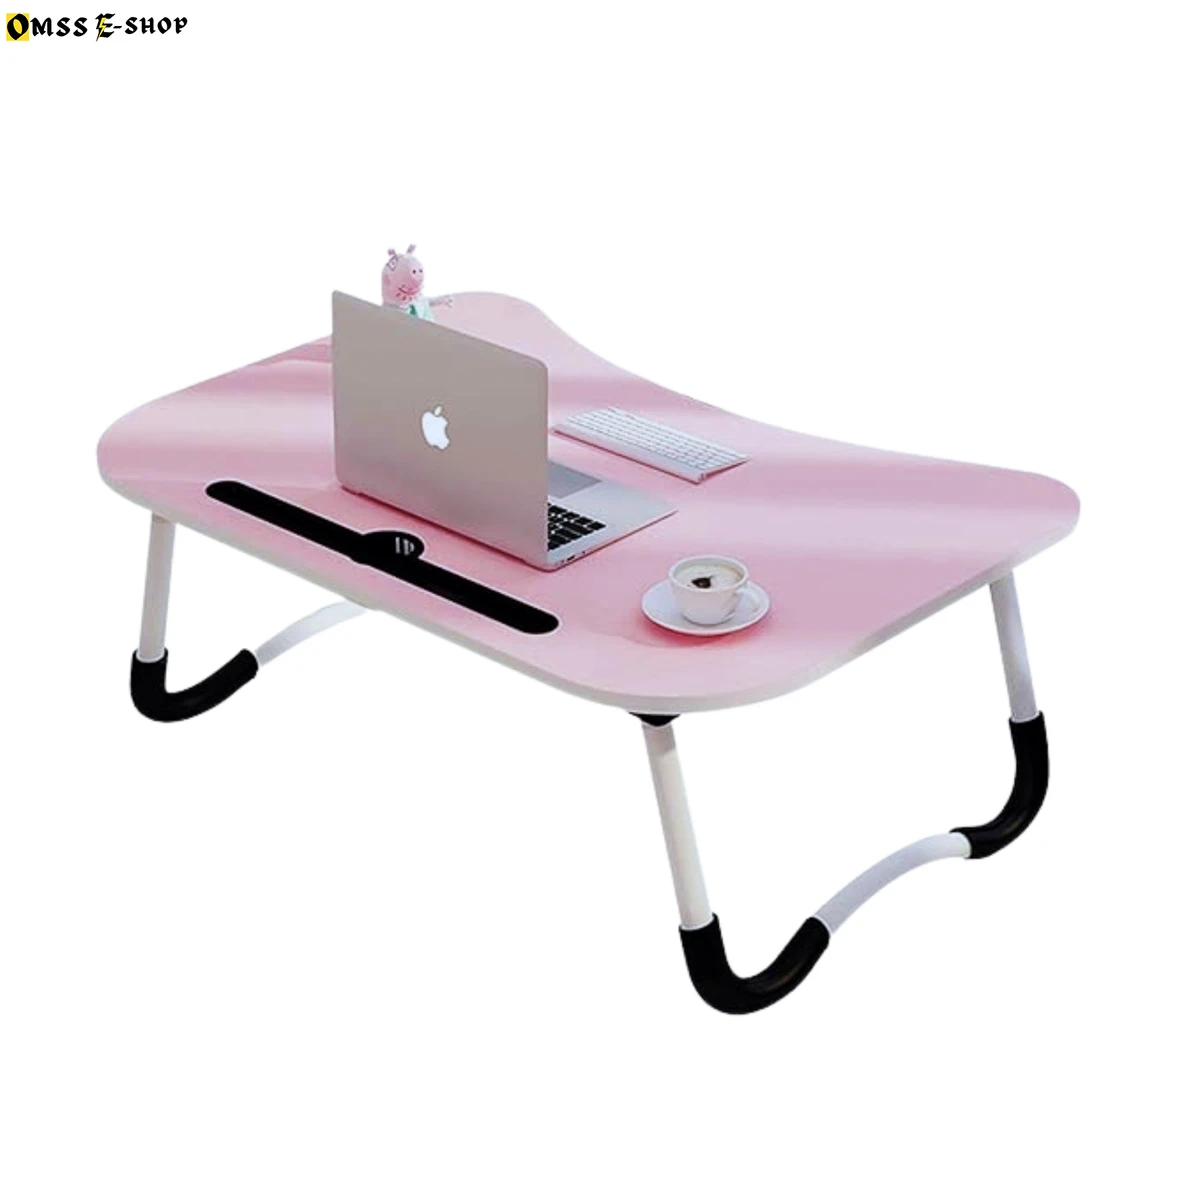 Foldable Wooden Mini Laptop desk for Couch, Sofa Bed, Study Tray Table Stand for Writing